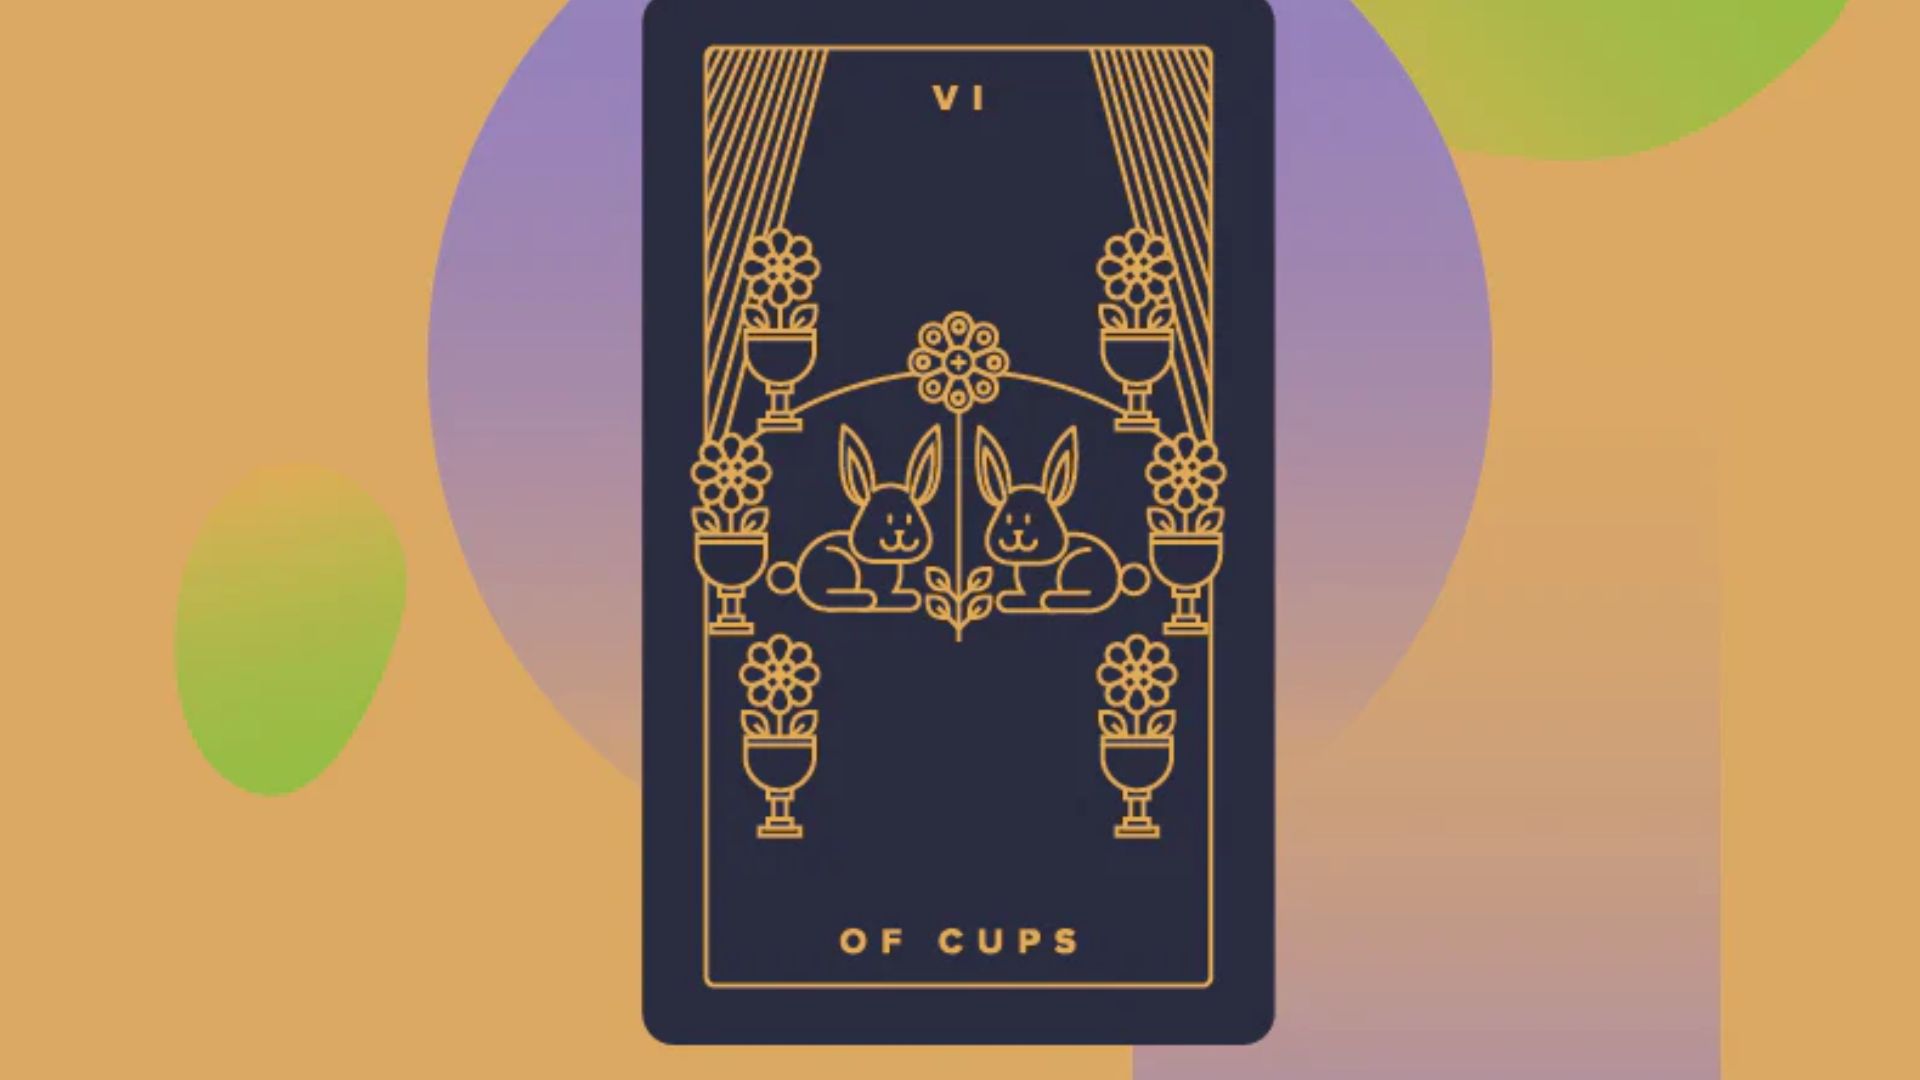 6 Of Cups - Embracing Your Inner Child